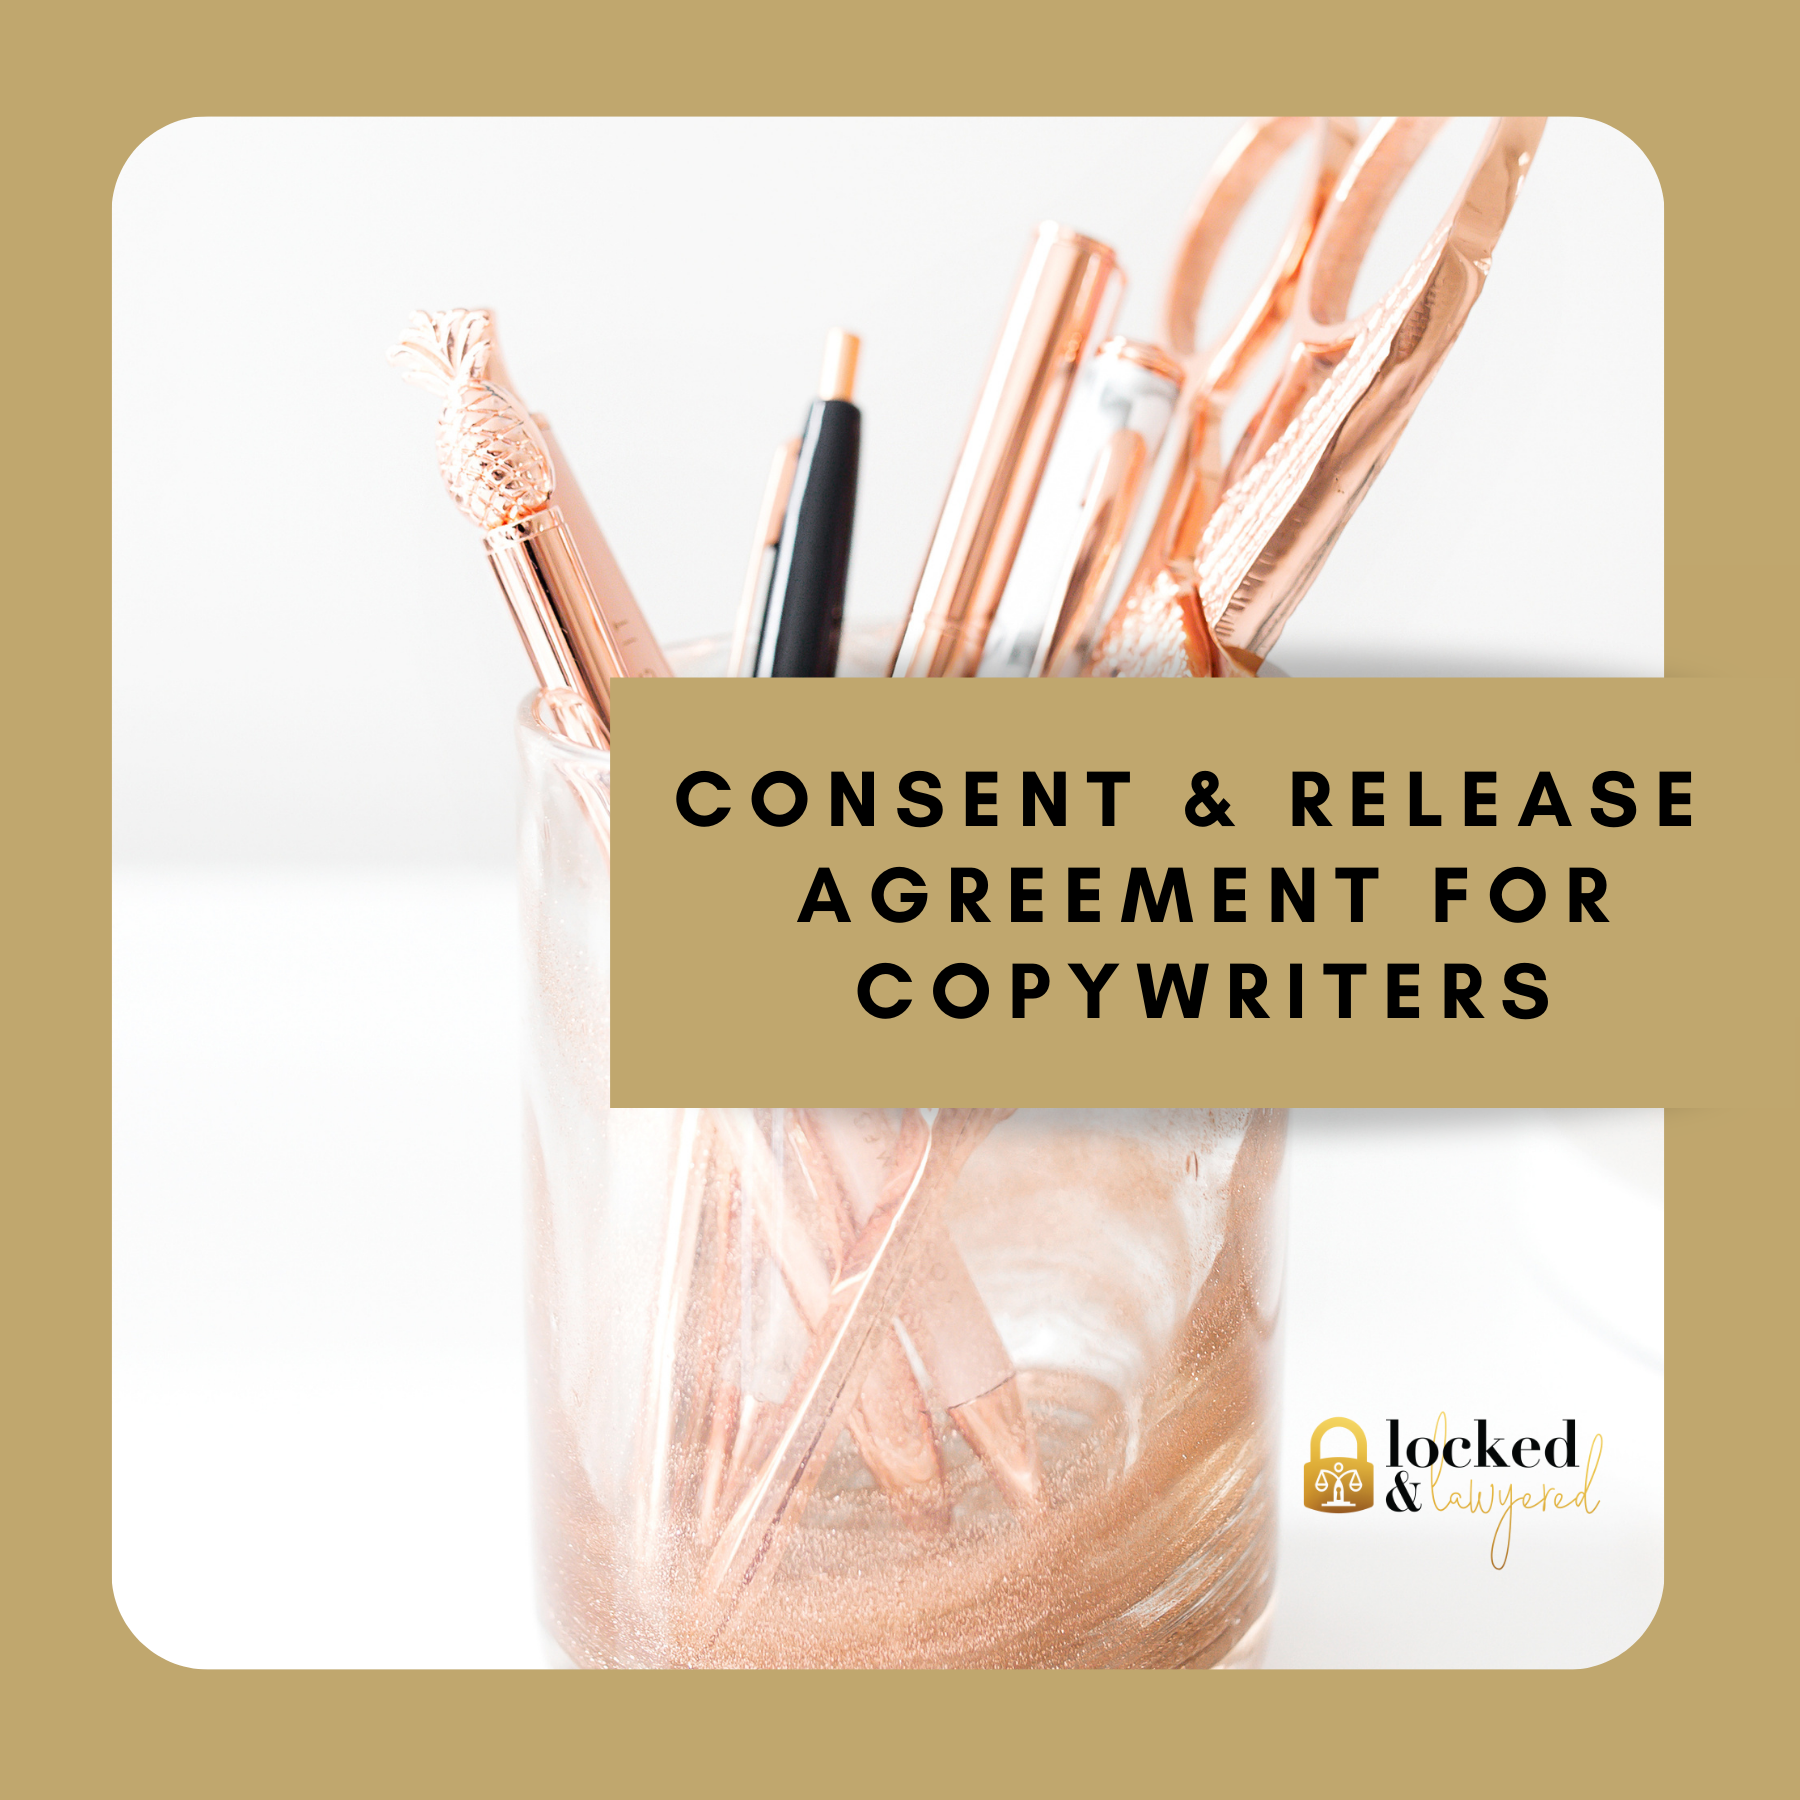 Consent & Release Agreement for Copywriters